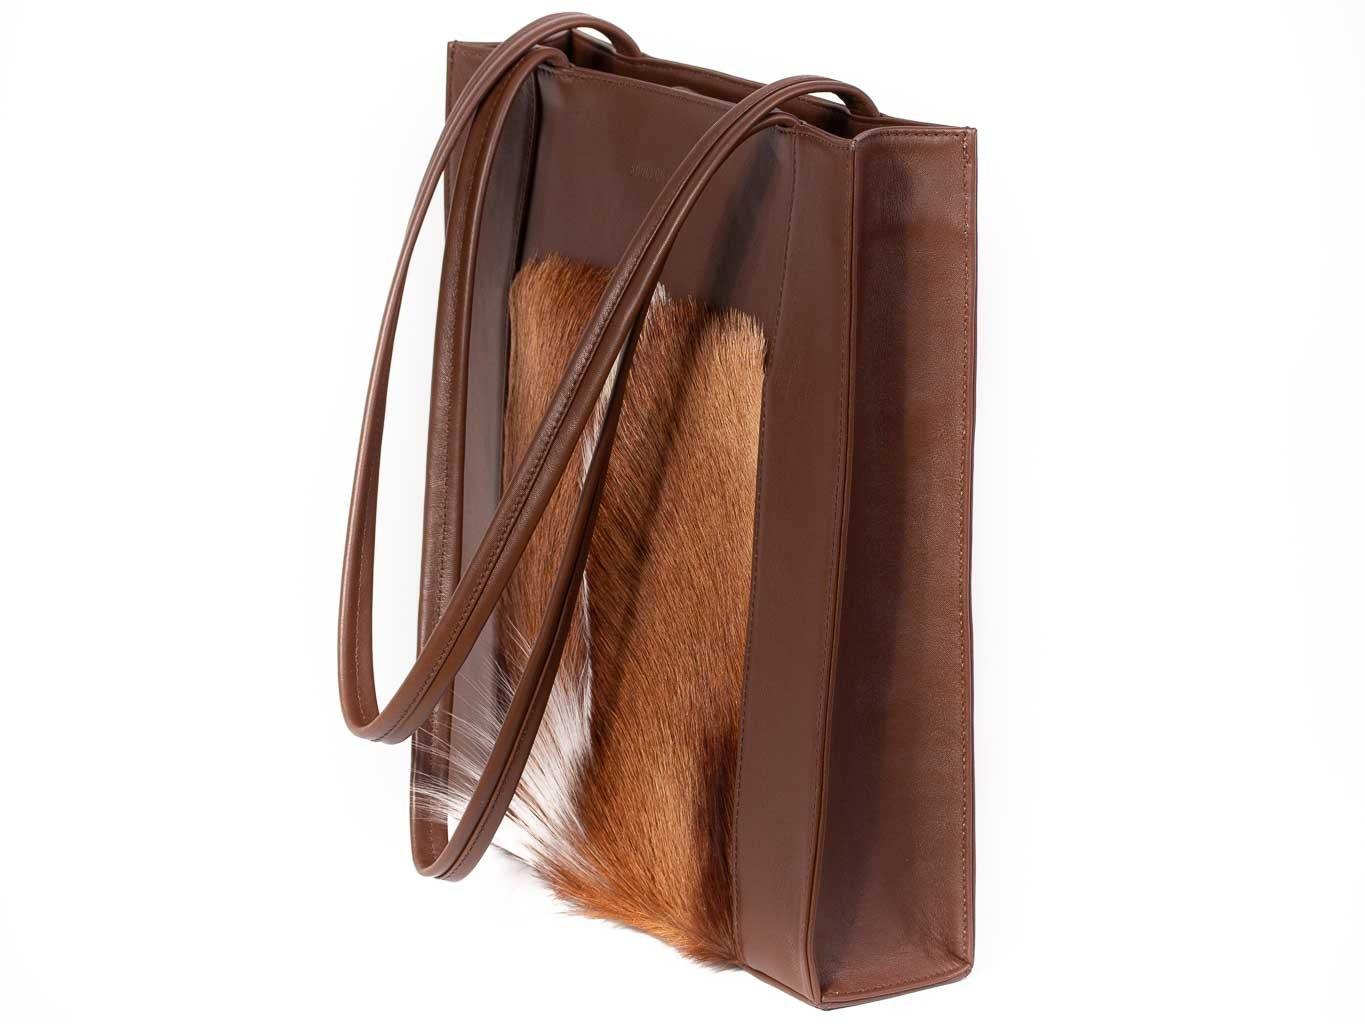 Tote Springbok Handbag in Cocoa Brown with a fan feature by Sherene Melinda side angle